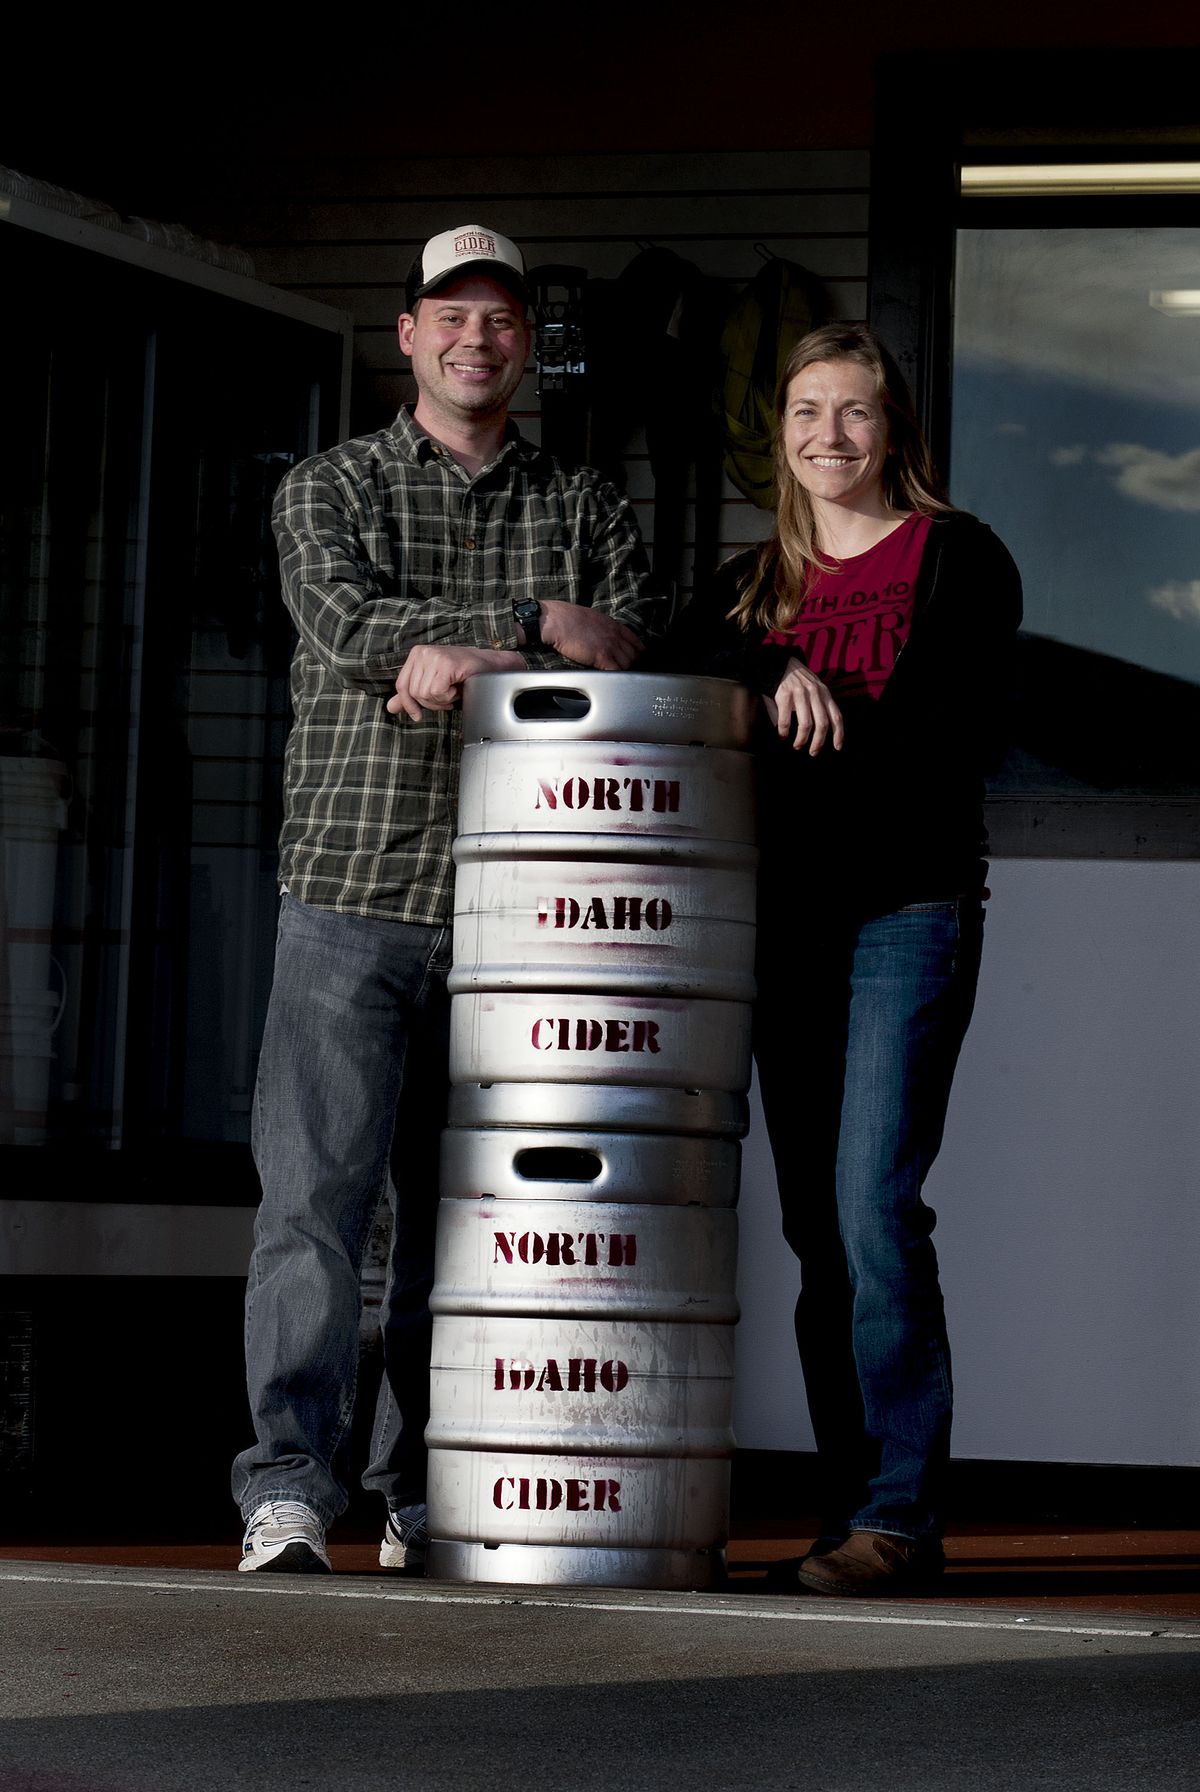 Greg and Mara Thorhaug talk about their new business, North Idaho Cider, at the facility in Hayden. They became interested in cider during a trip around the world from 2010 to 2012, sampling ciders from Argentina to Spain to New Zealand. (Kathy Plonka)